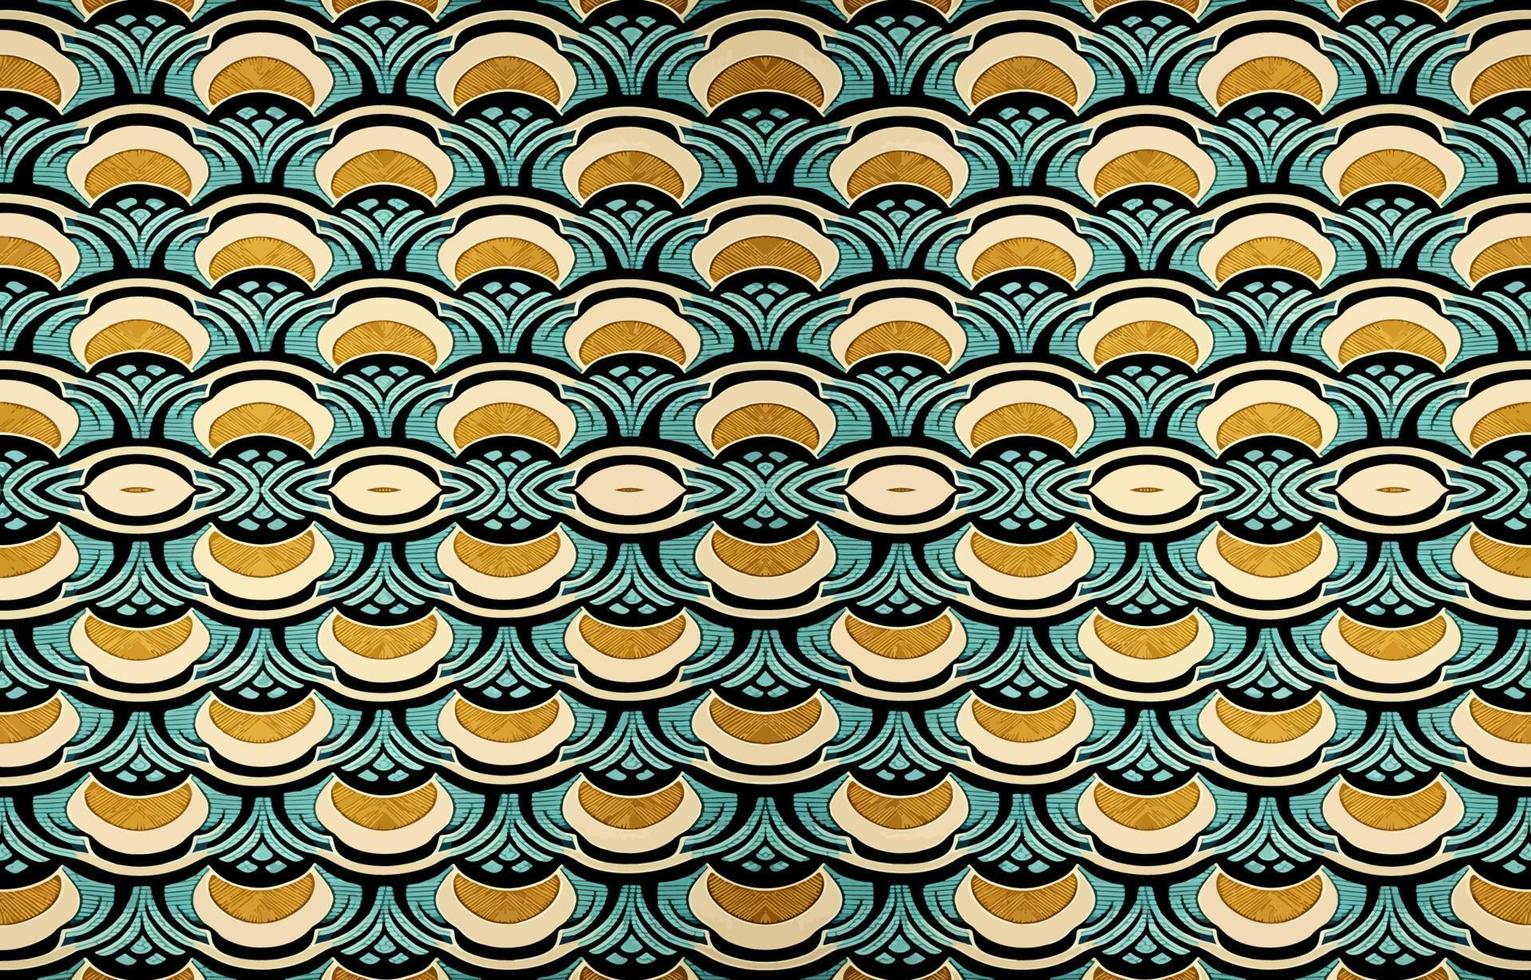 Wave cloud shells seamless fabric pattern. Abstract ethnic traditional folk antique vintage retro graphic line. Fabric textile vector illustration ornate elegant luxury Japanese China Asian style.